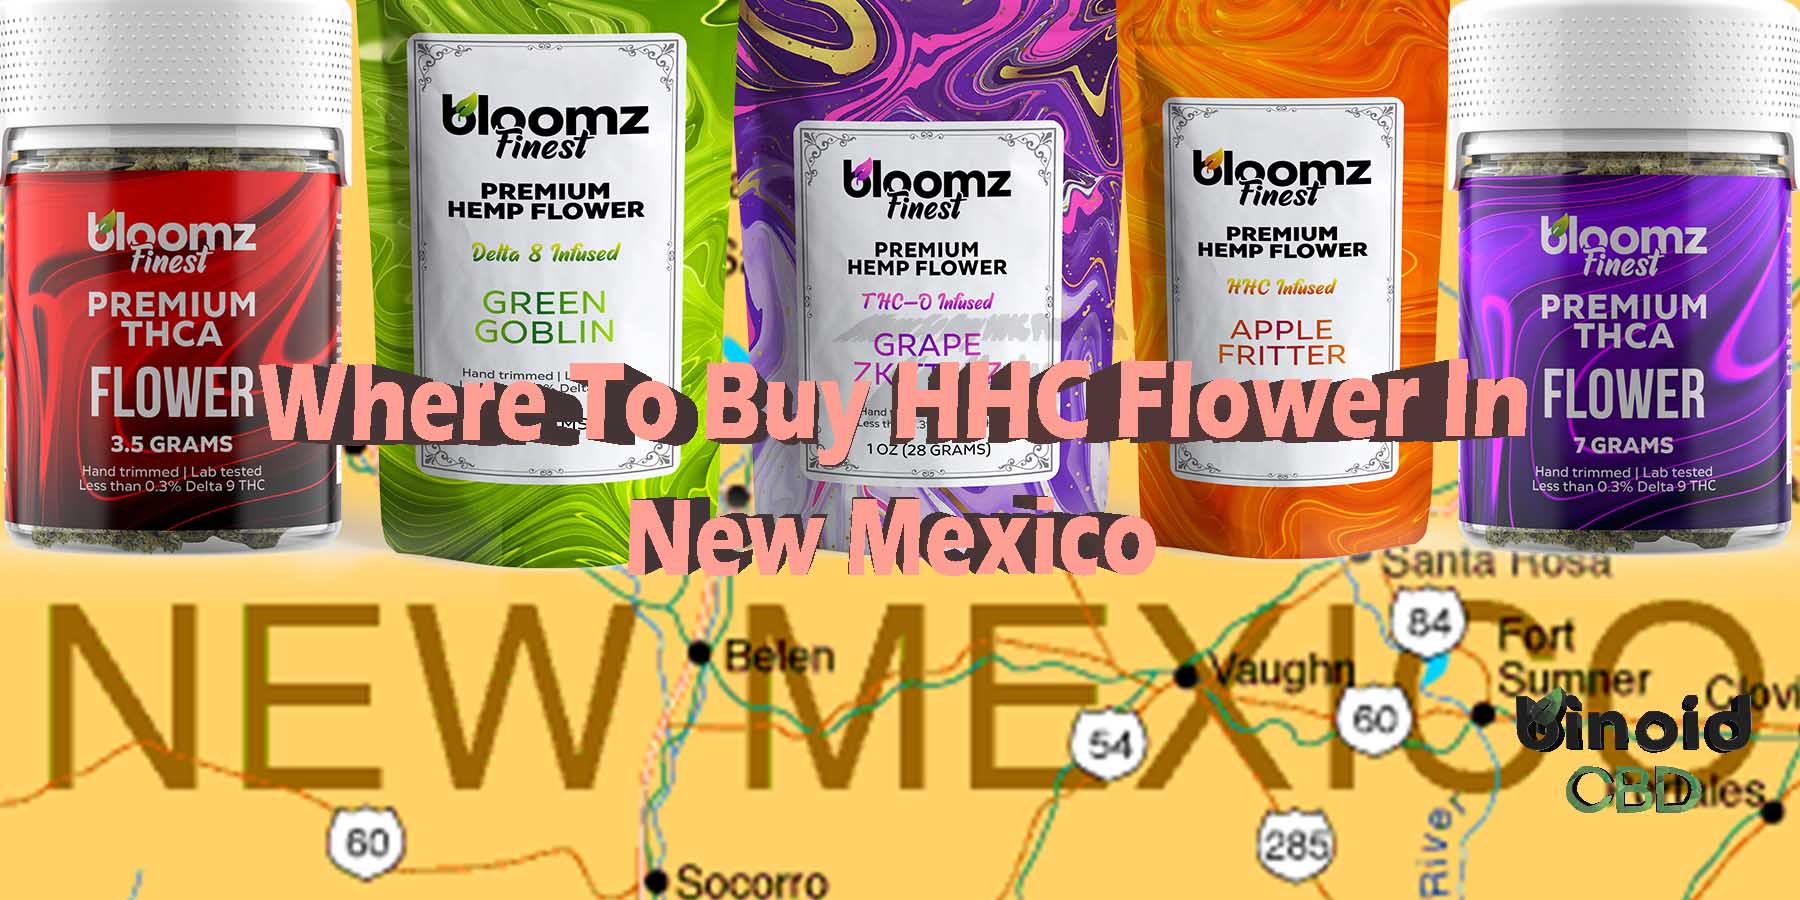 Where-To-Buy-HHC-Flower-In-New-Mexico-What-Is-HHC-Flower-Where-Is-It-Actually-Legal-HHC-Flower-How-To-Buy-HHC.